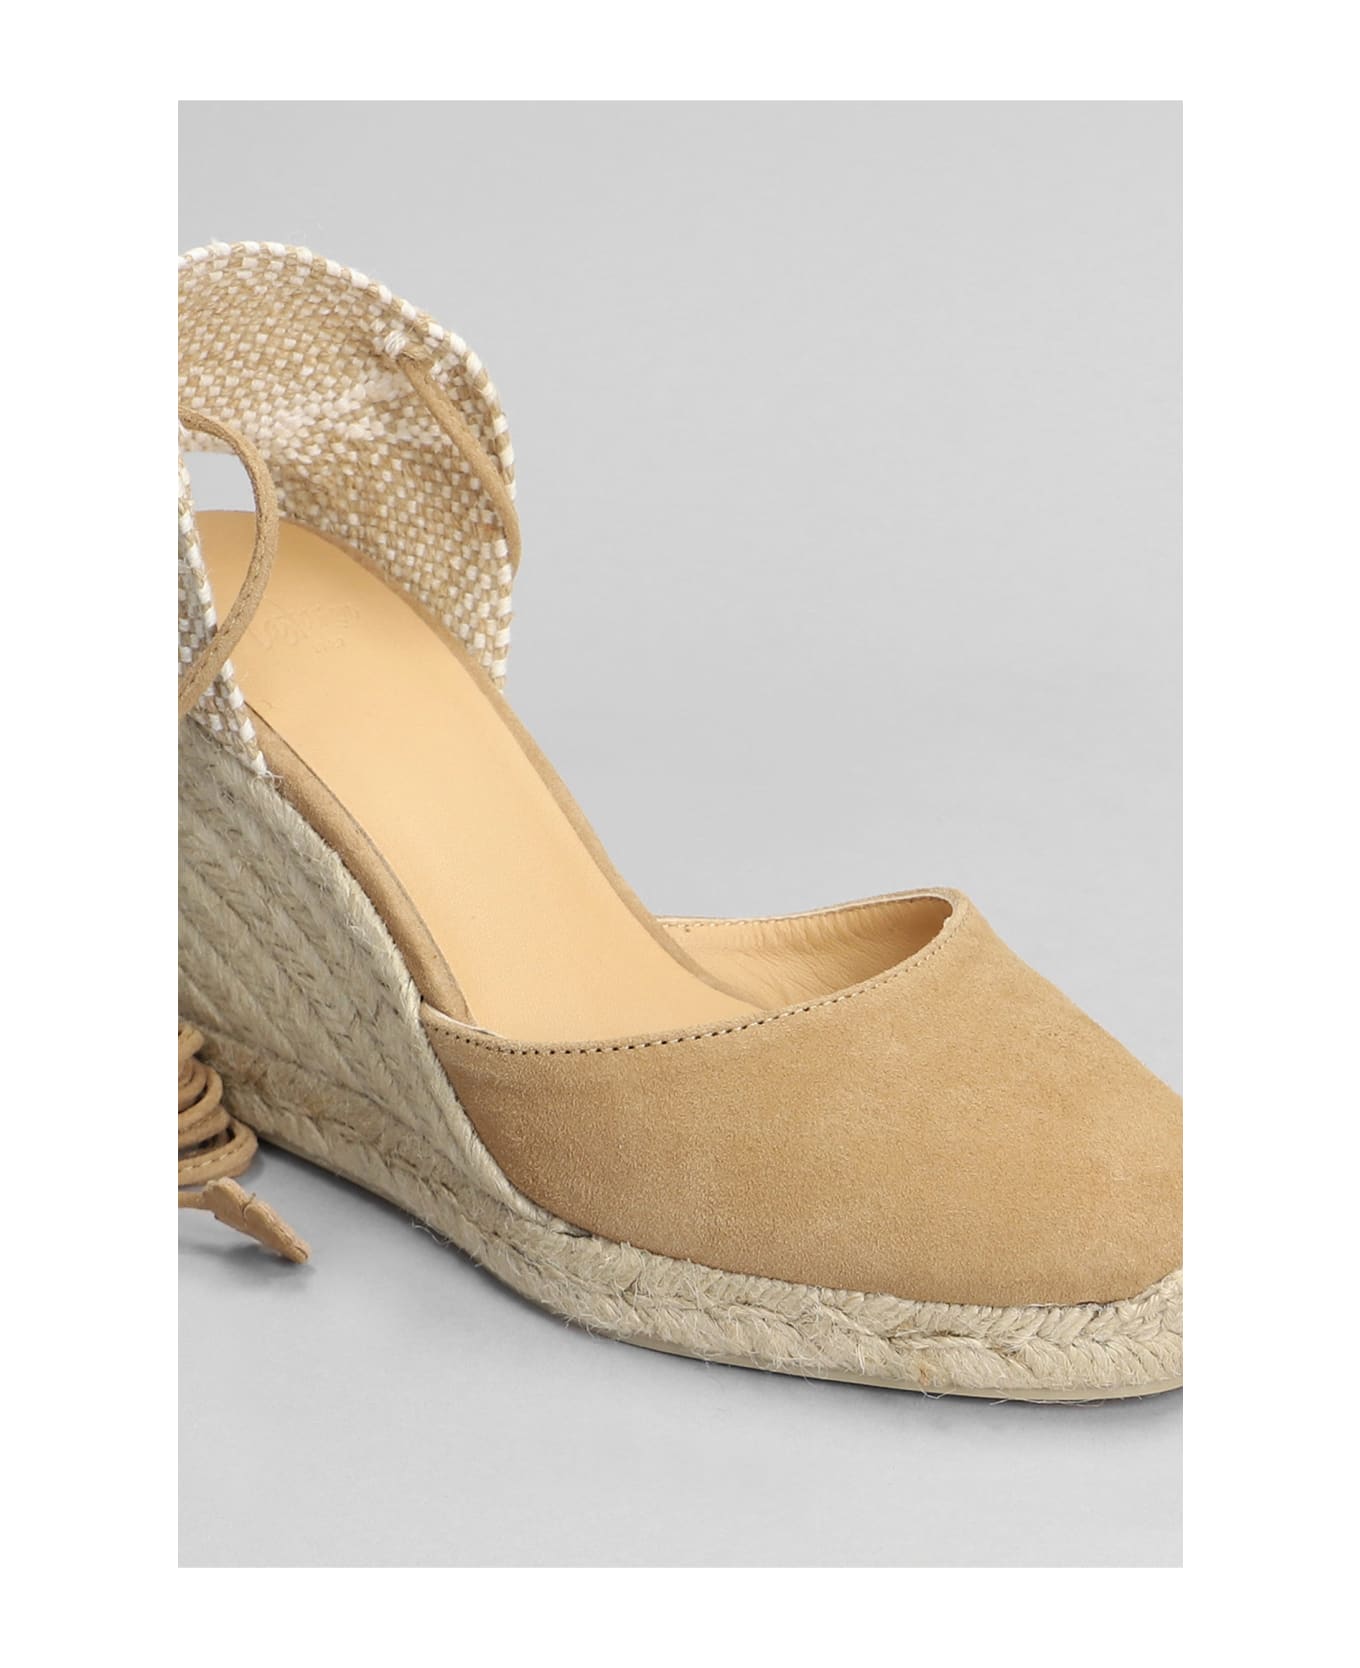 Castañer Carina-8-007 Wedges In Leather Color Suede - leather color